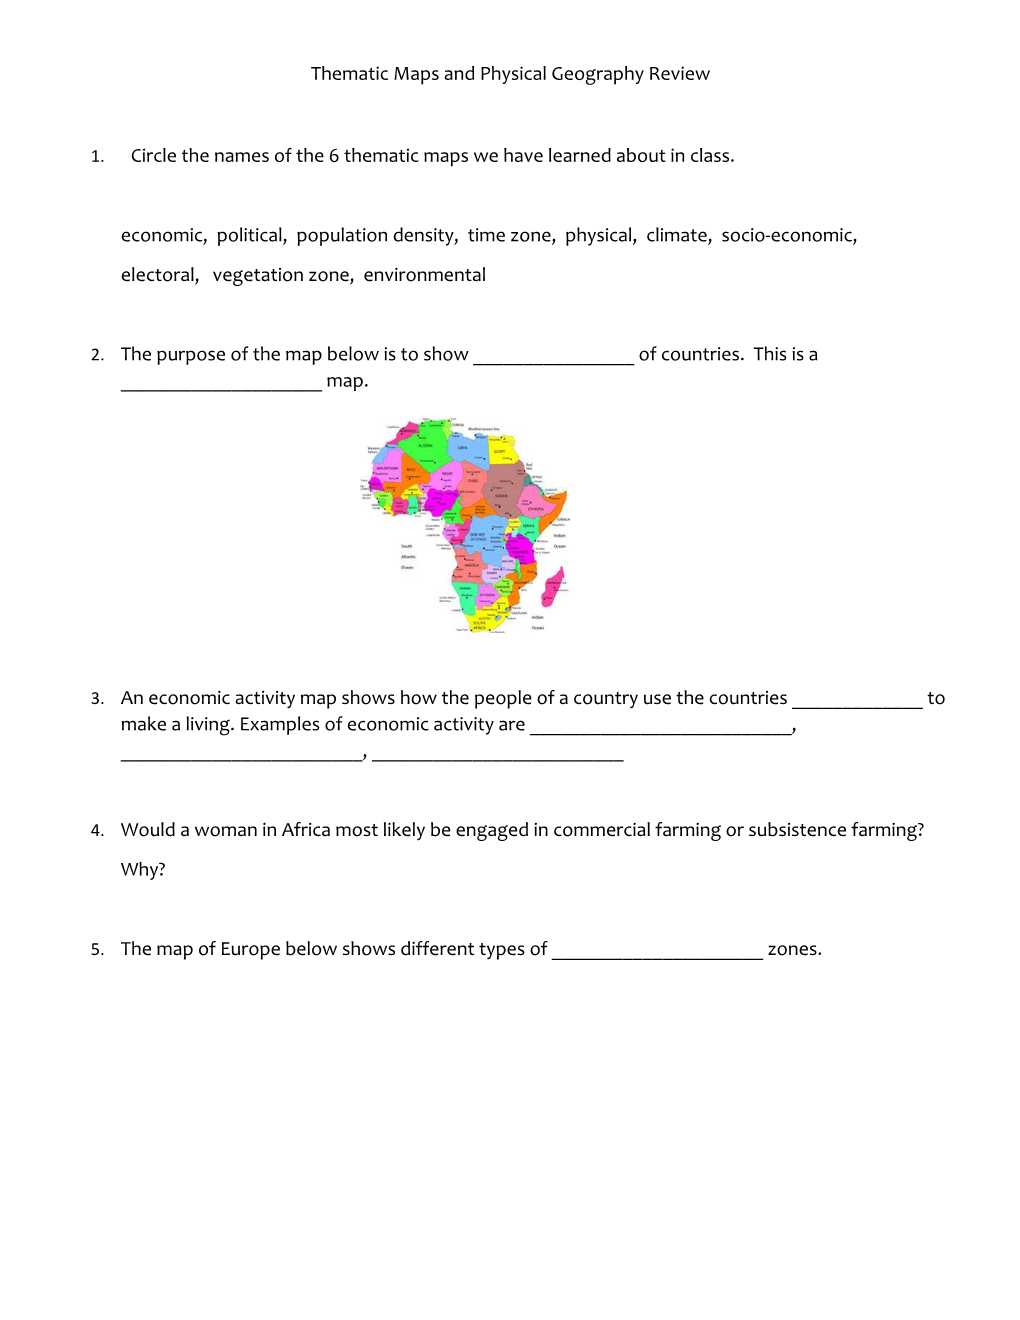 Thematic Maps and Physical Geography Review